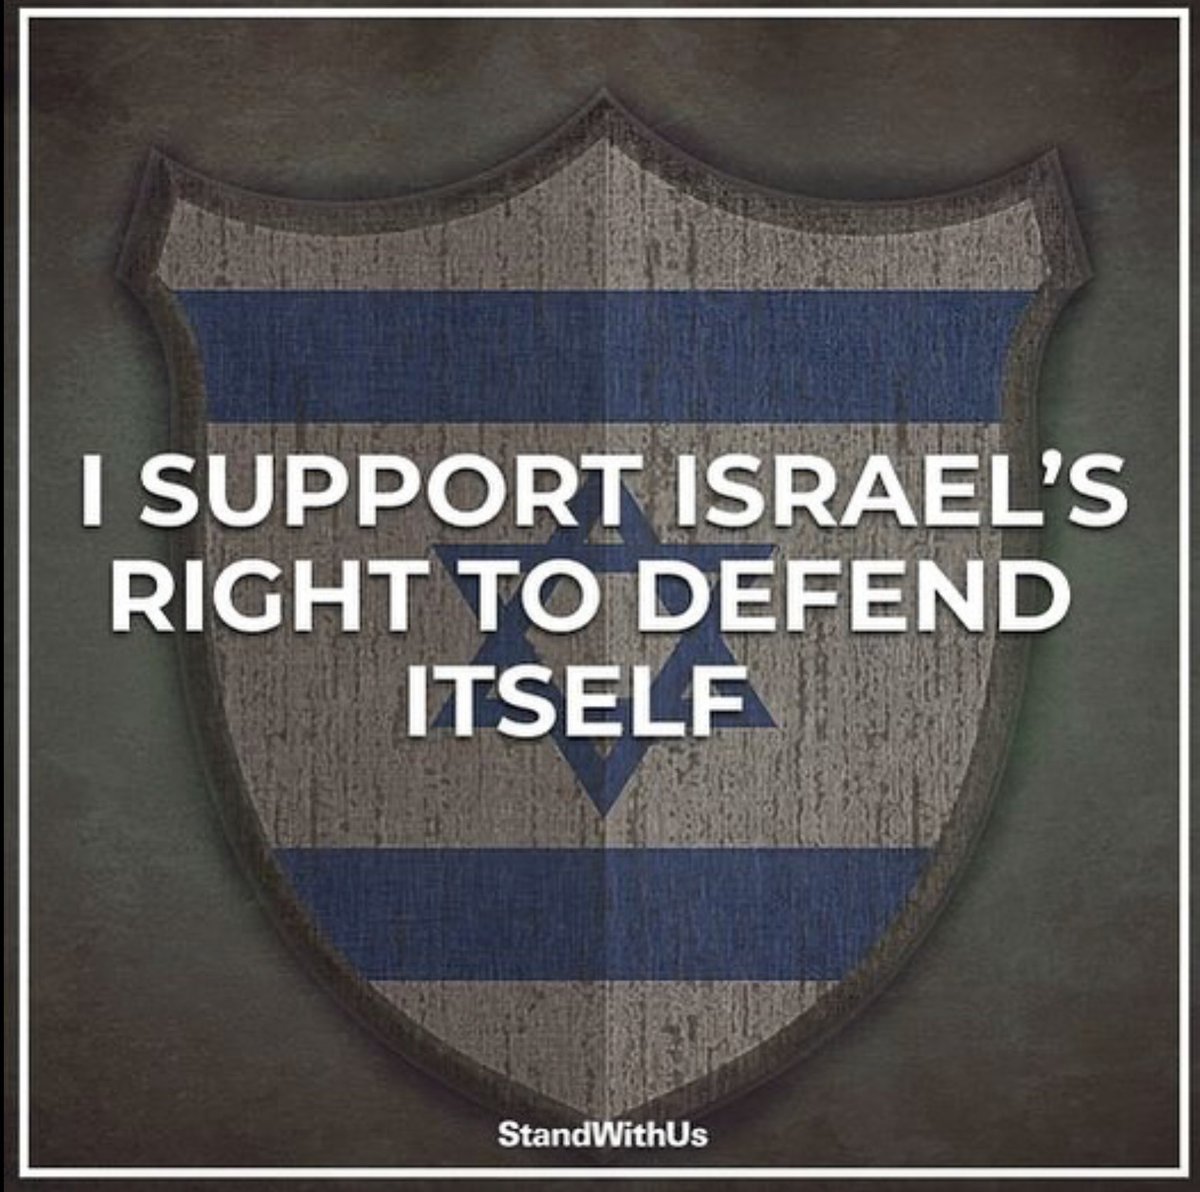 🇮🇱 SHARE if you support #Israel's right to defend itself from terrorism 🇮🇱